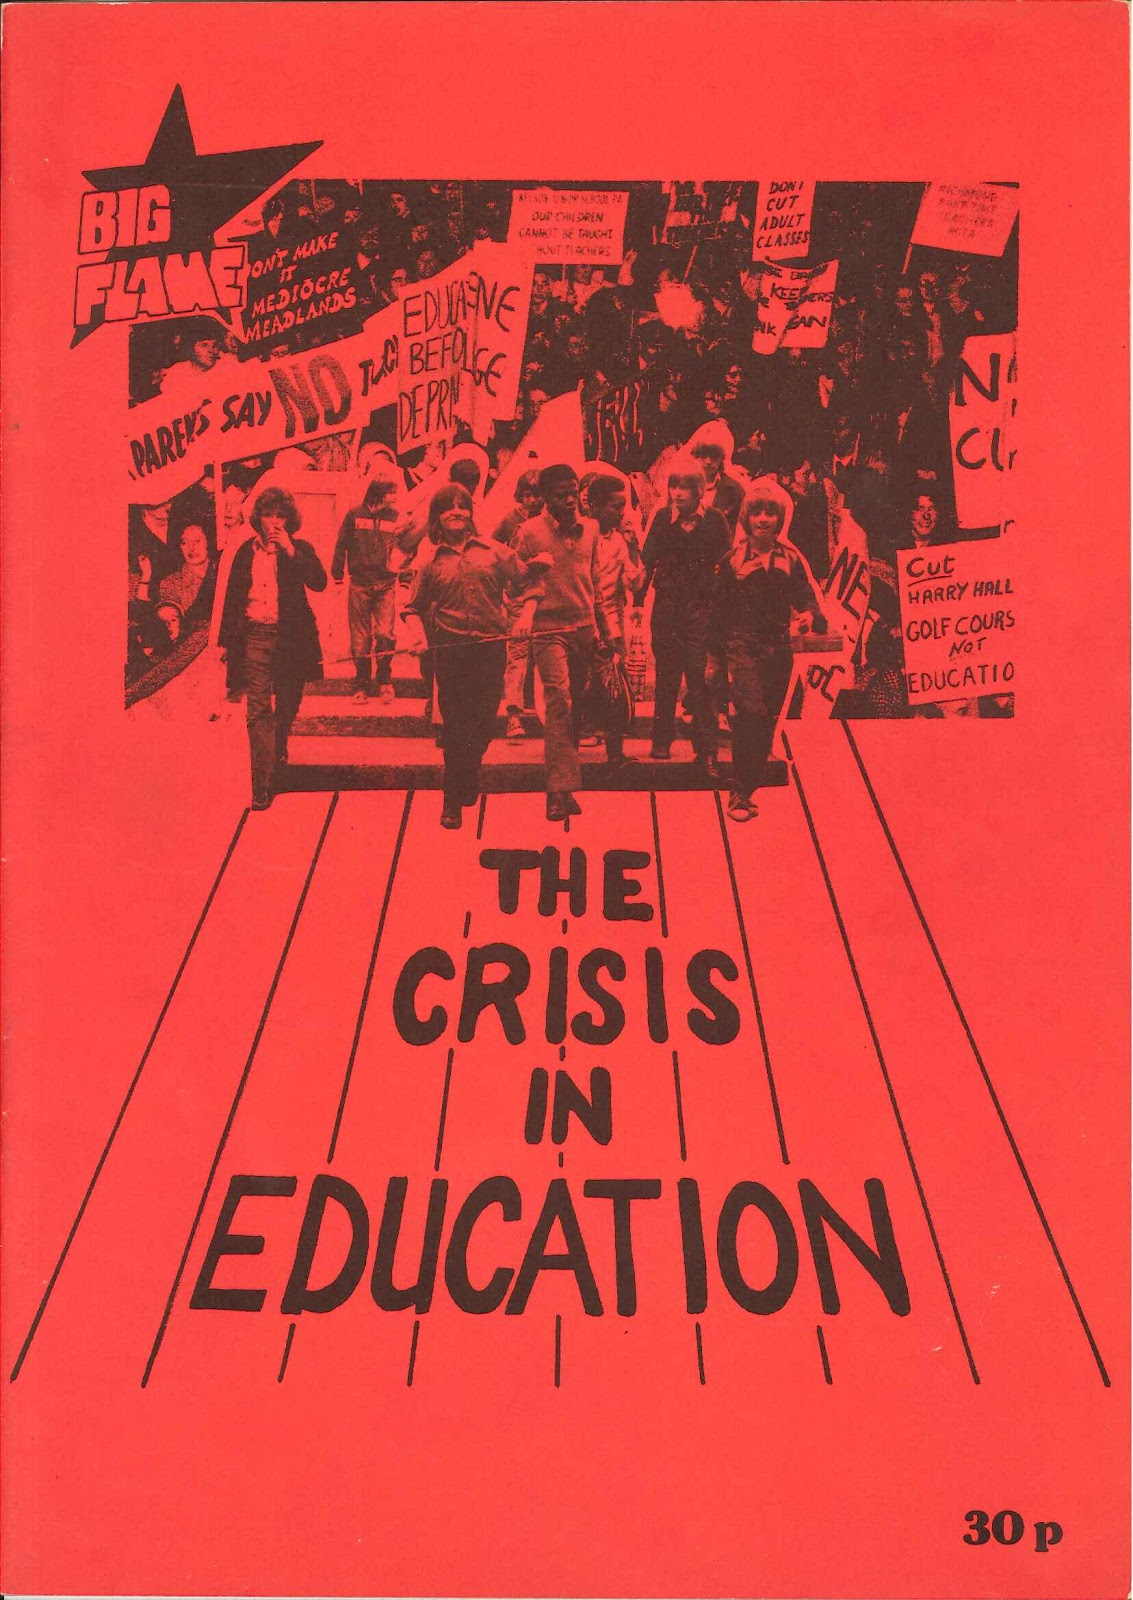 Neoliberalism And Education In Ireland